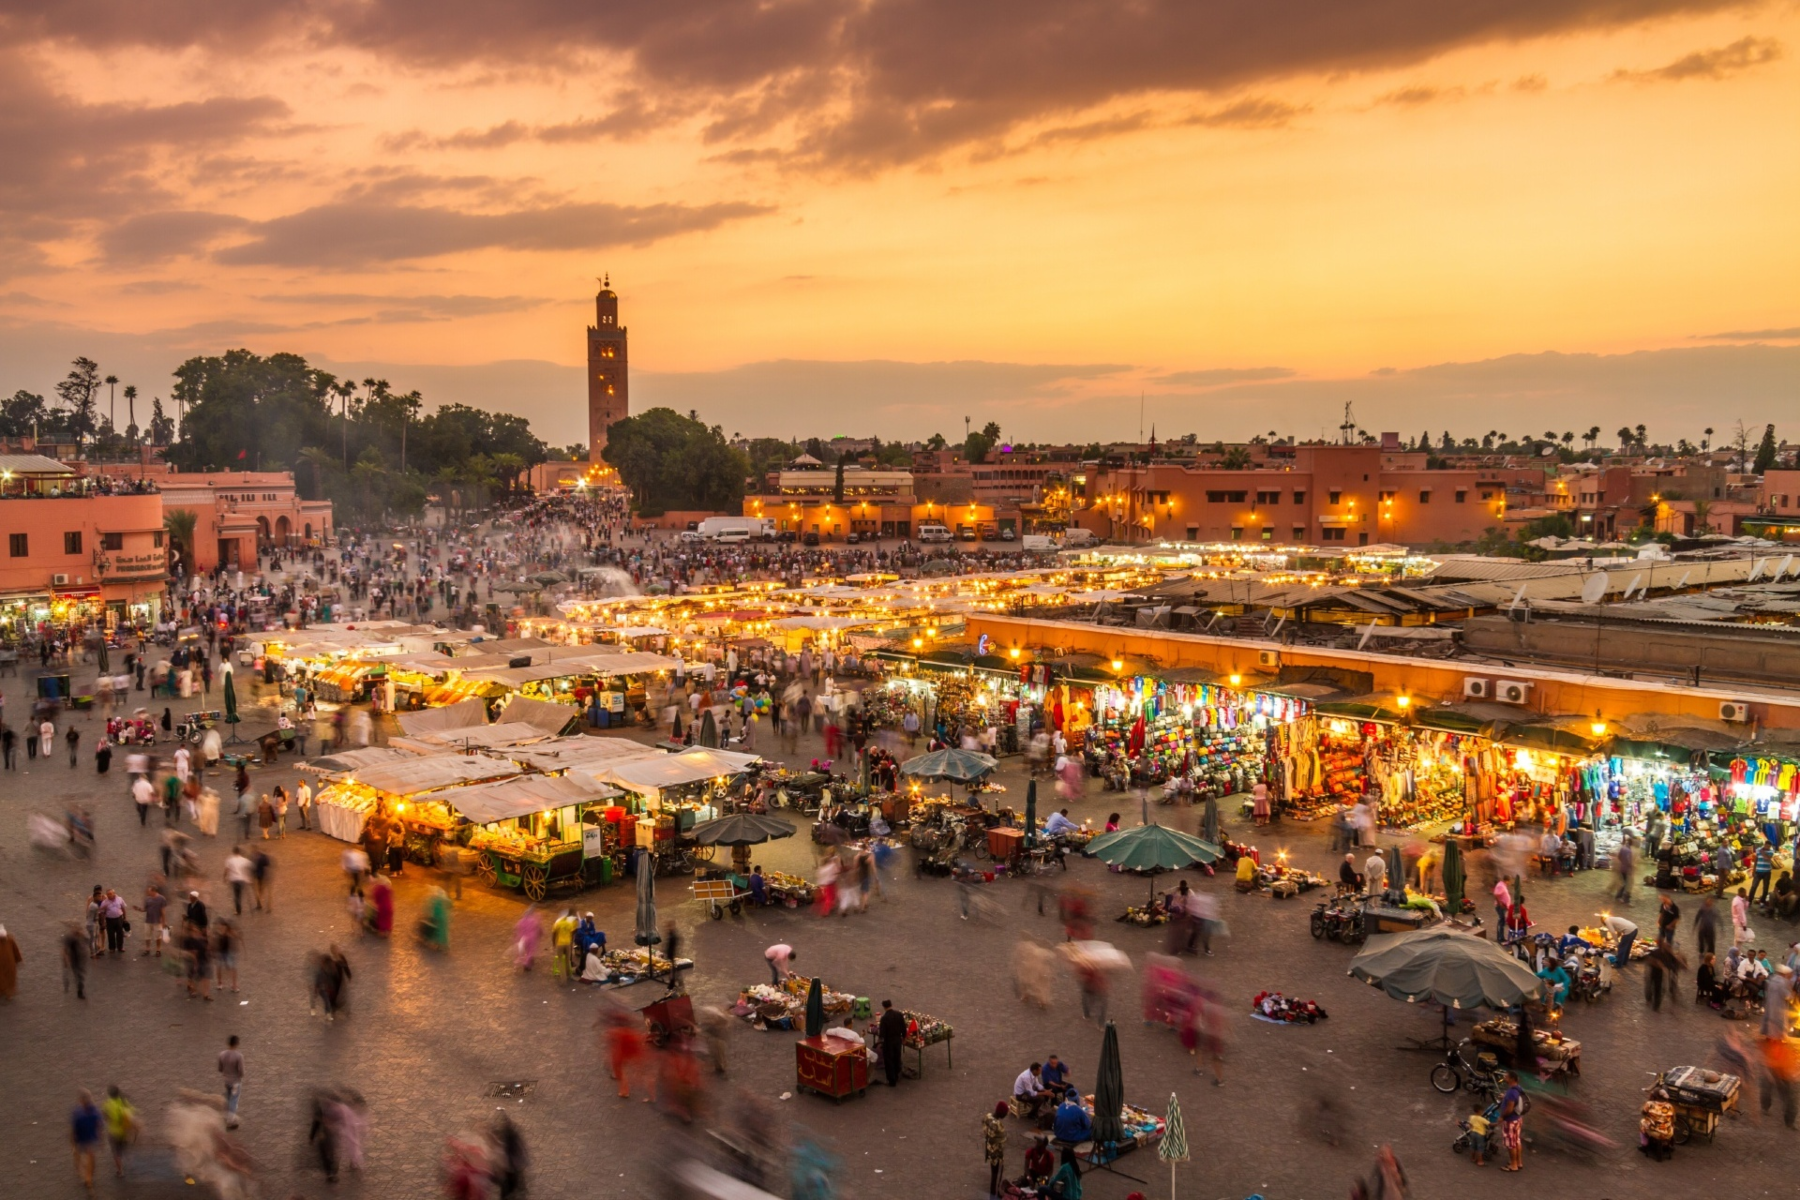 Where should you be eating in Marrakech?